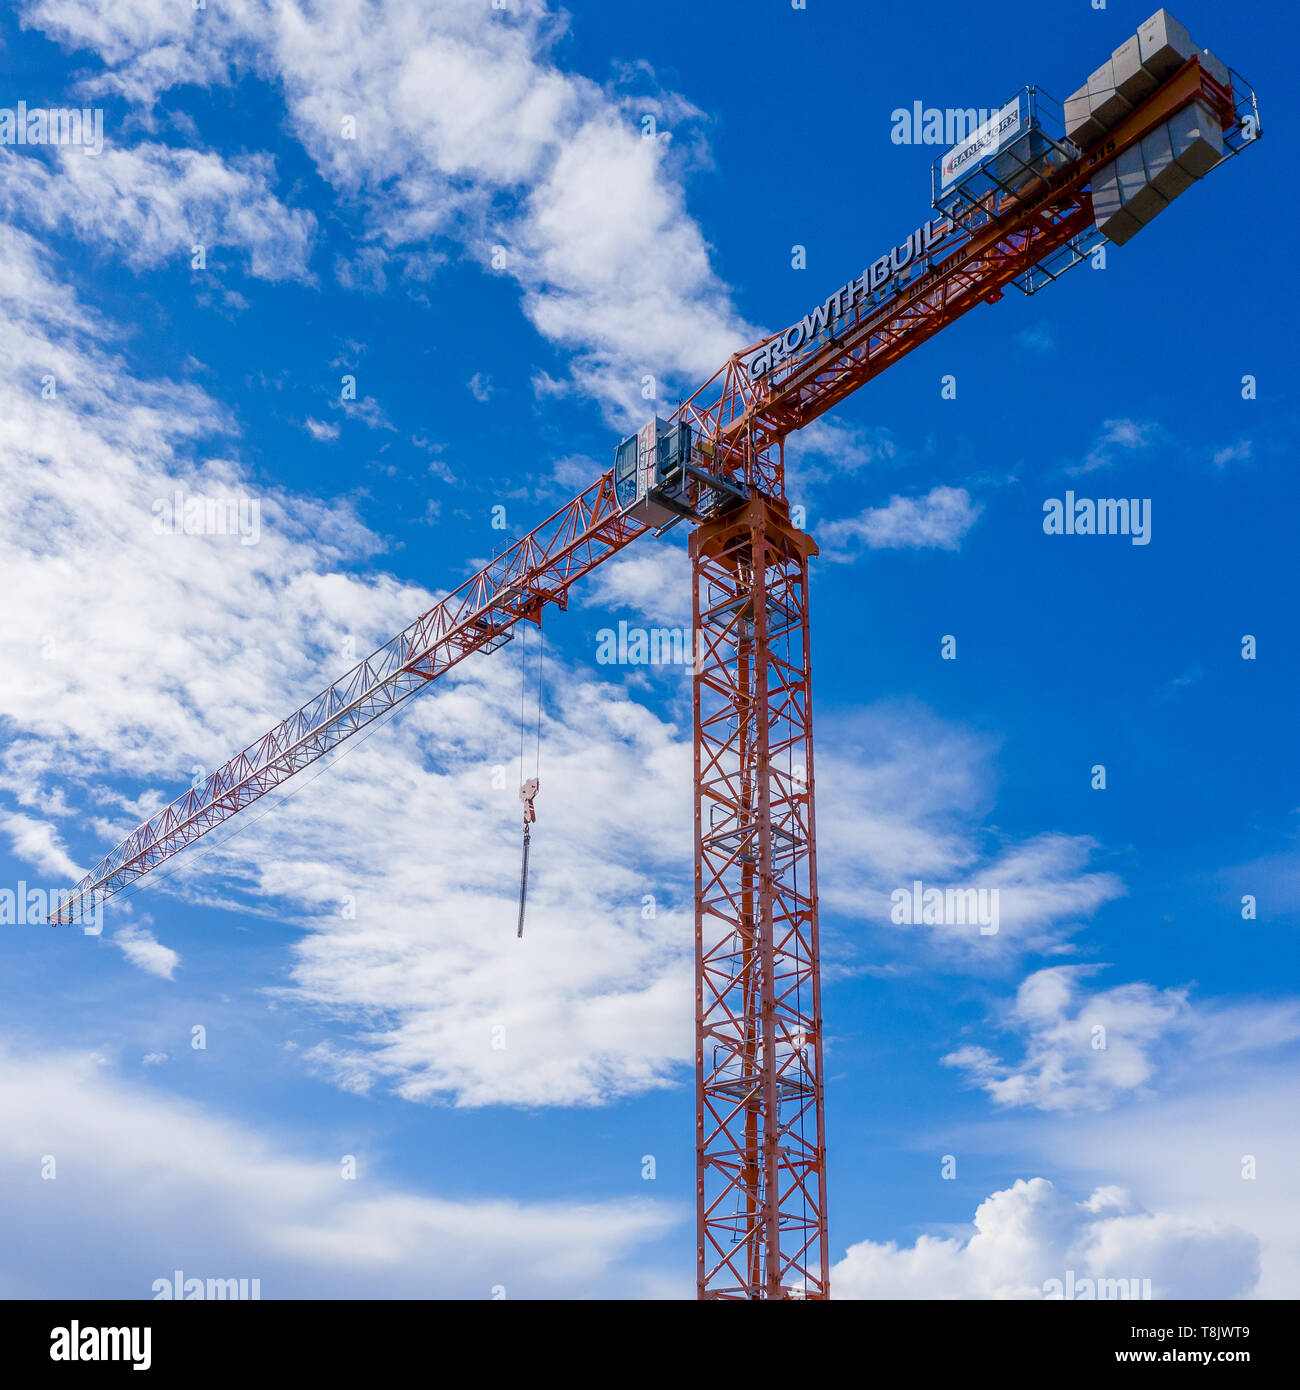 Pymble, Sydney, Australia - May 5 2019: Tall tower crane over construction site with blue sky and clouds behind. Crane by KraneWorx and construction b Stock Photo